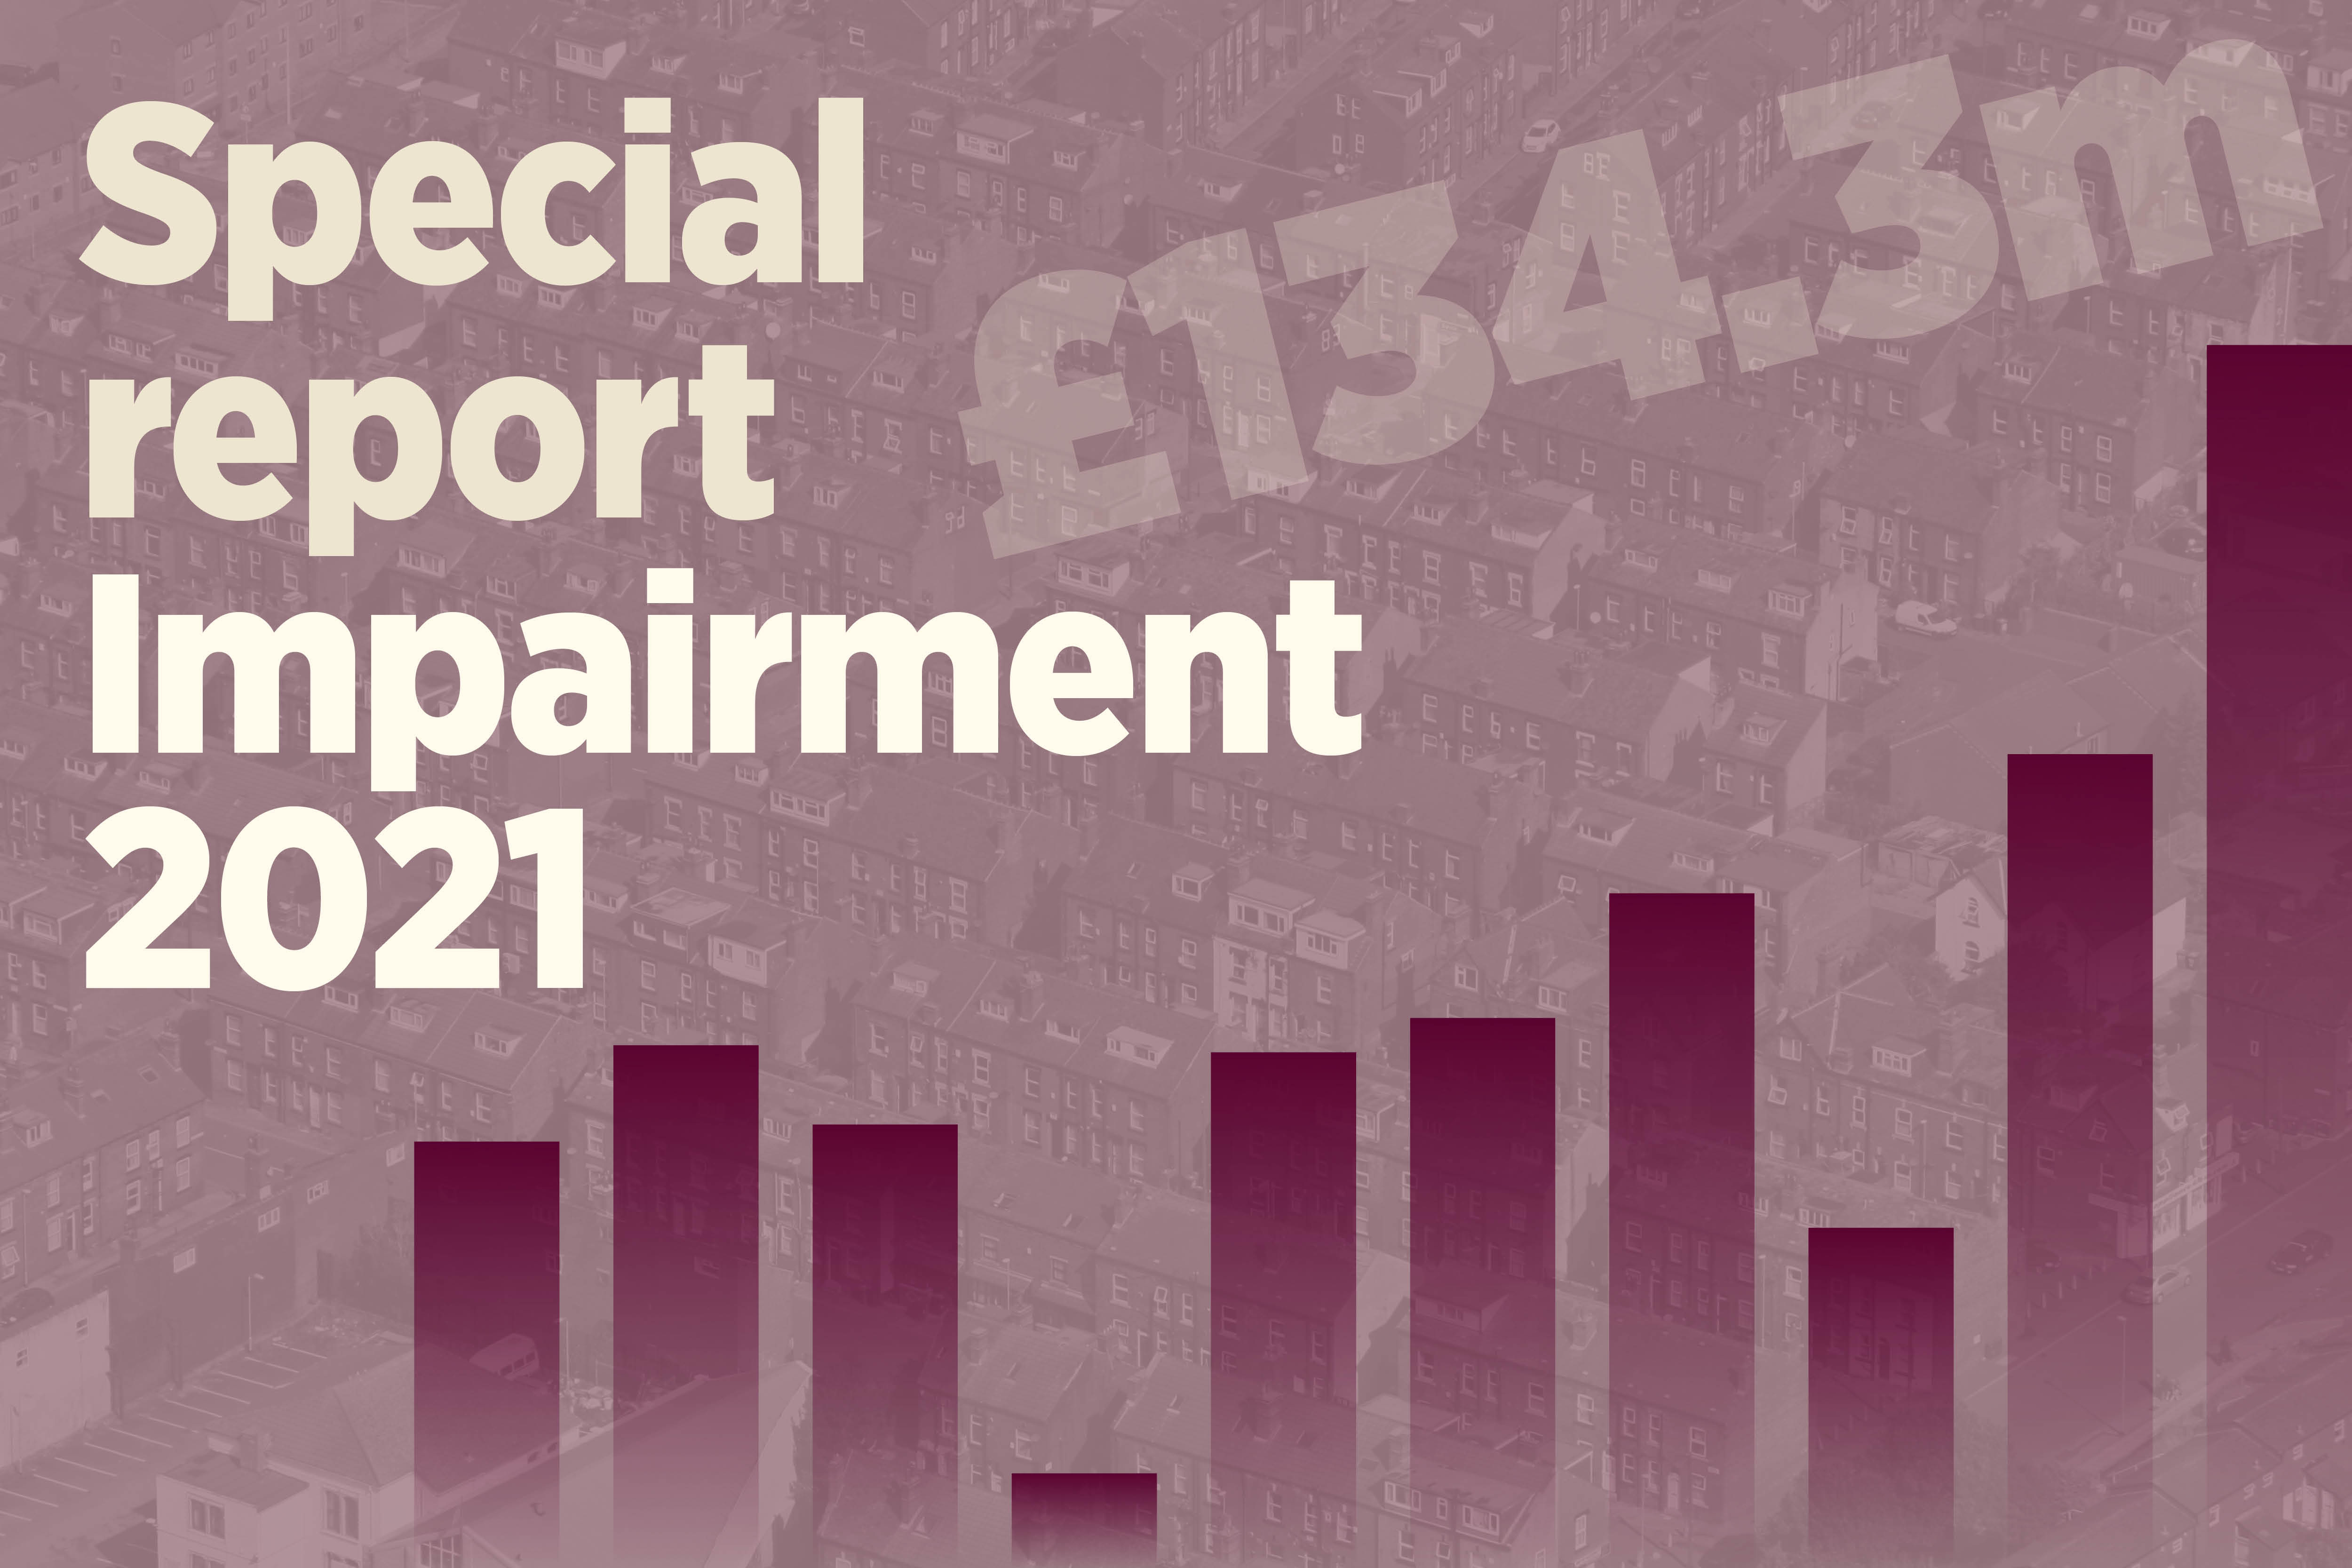 Special report: housing associations’ net impairments rise to highest level yet